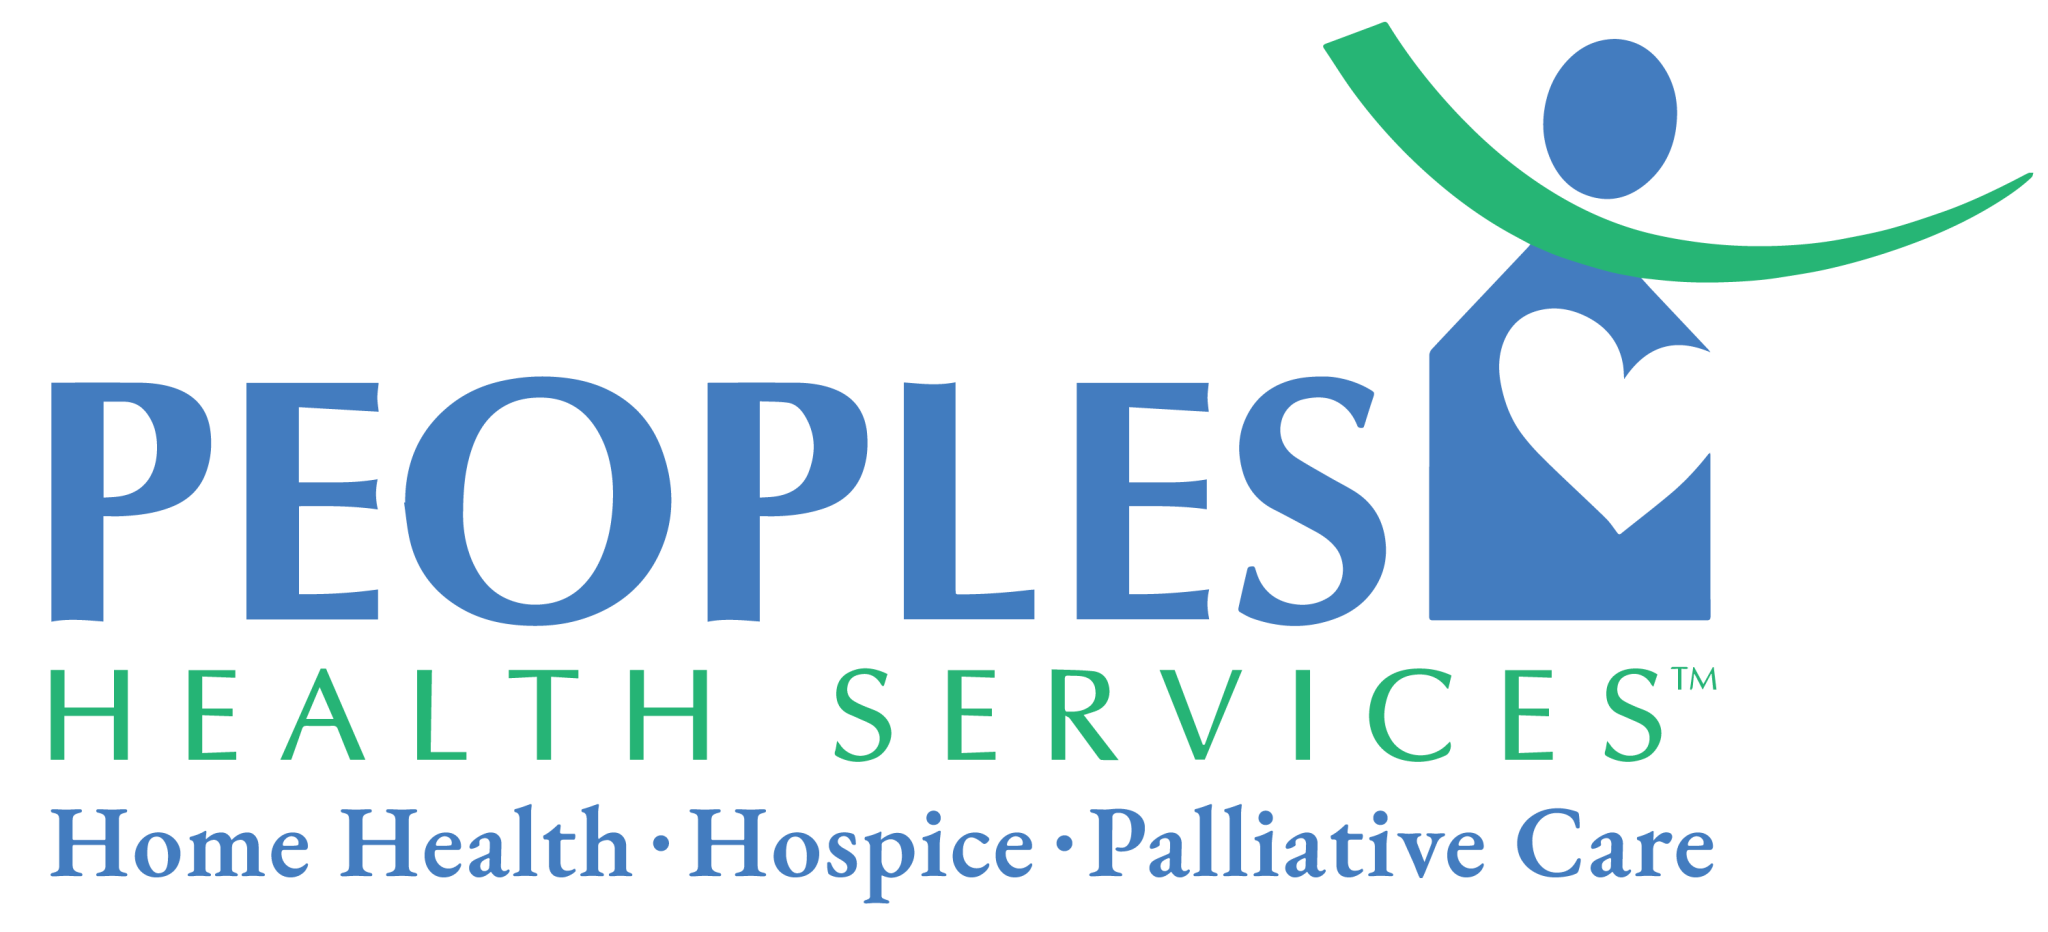 Peoples Hospice and Palliative Care of Florida